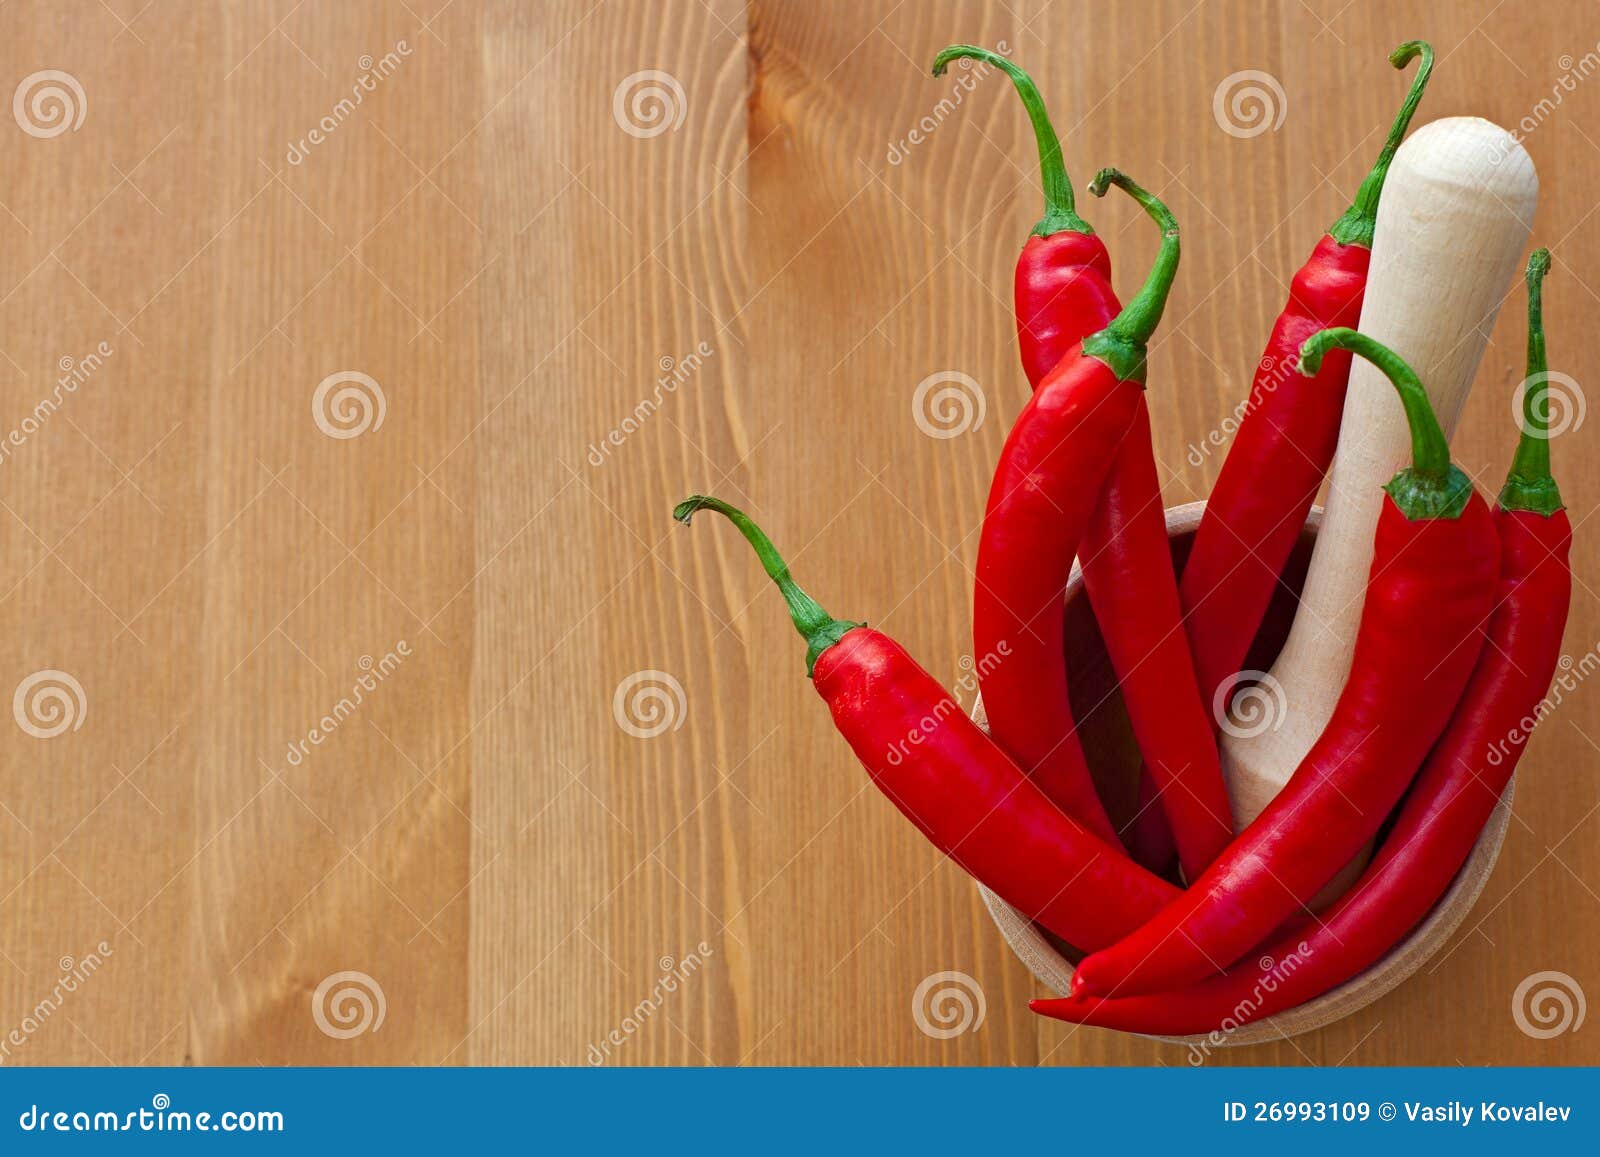 hot red peppers and wooden pounder